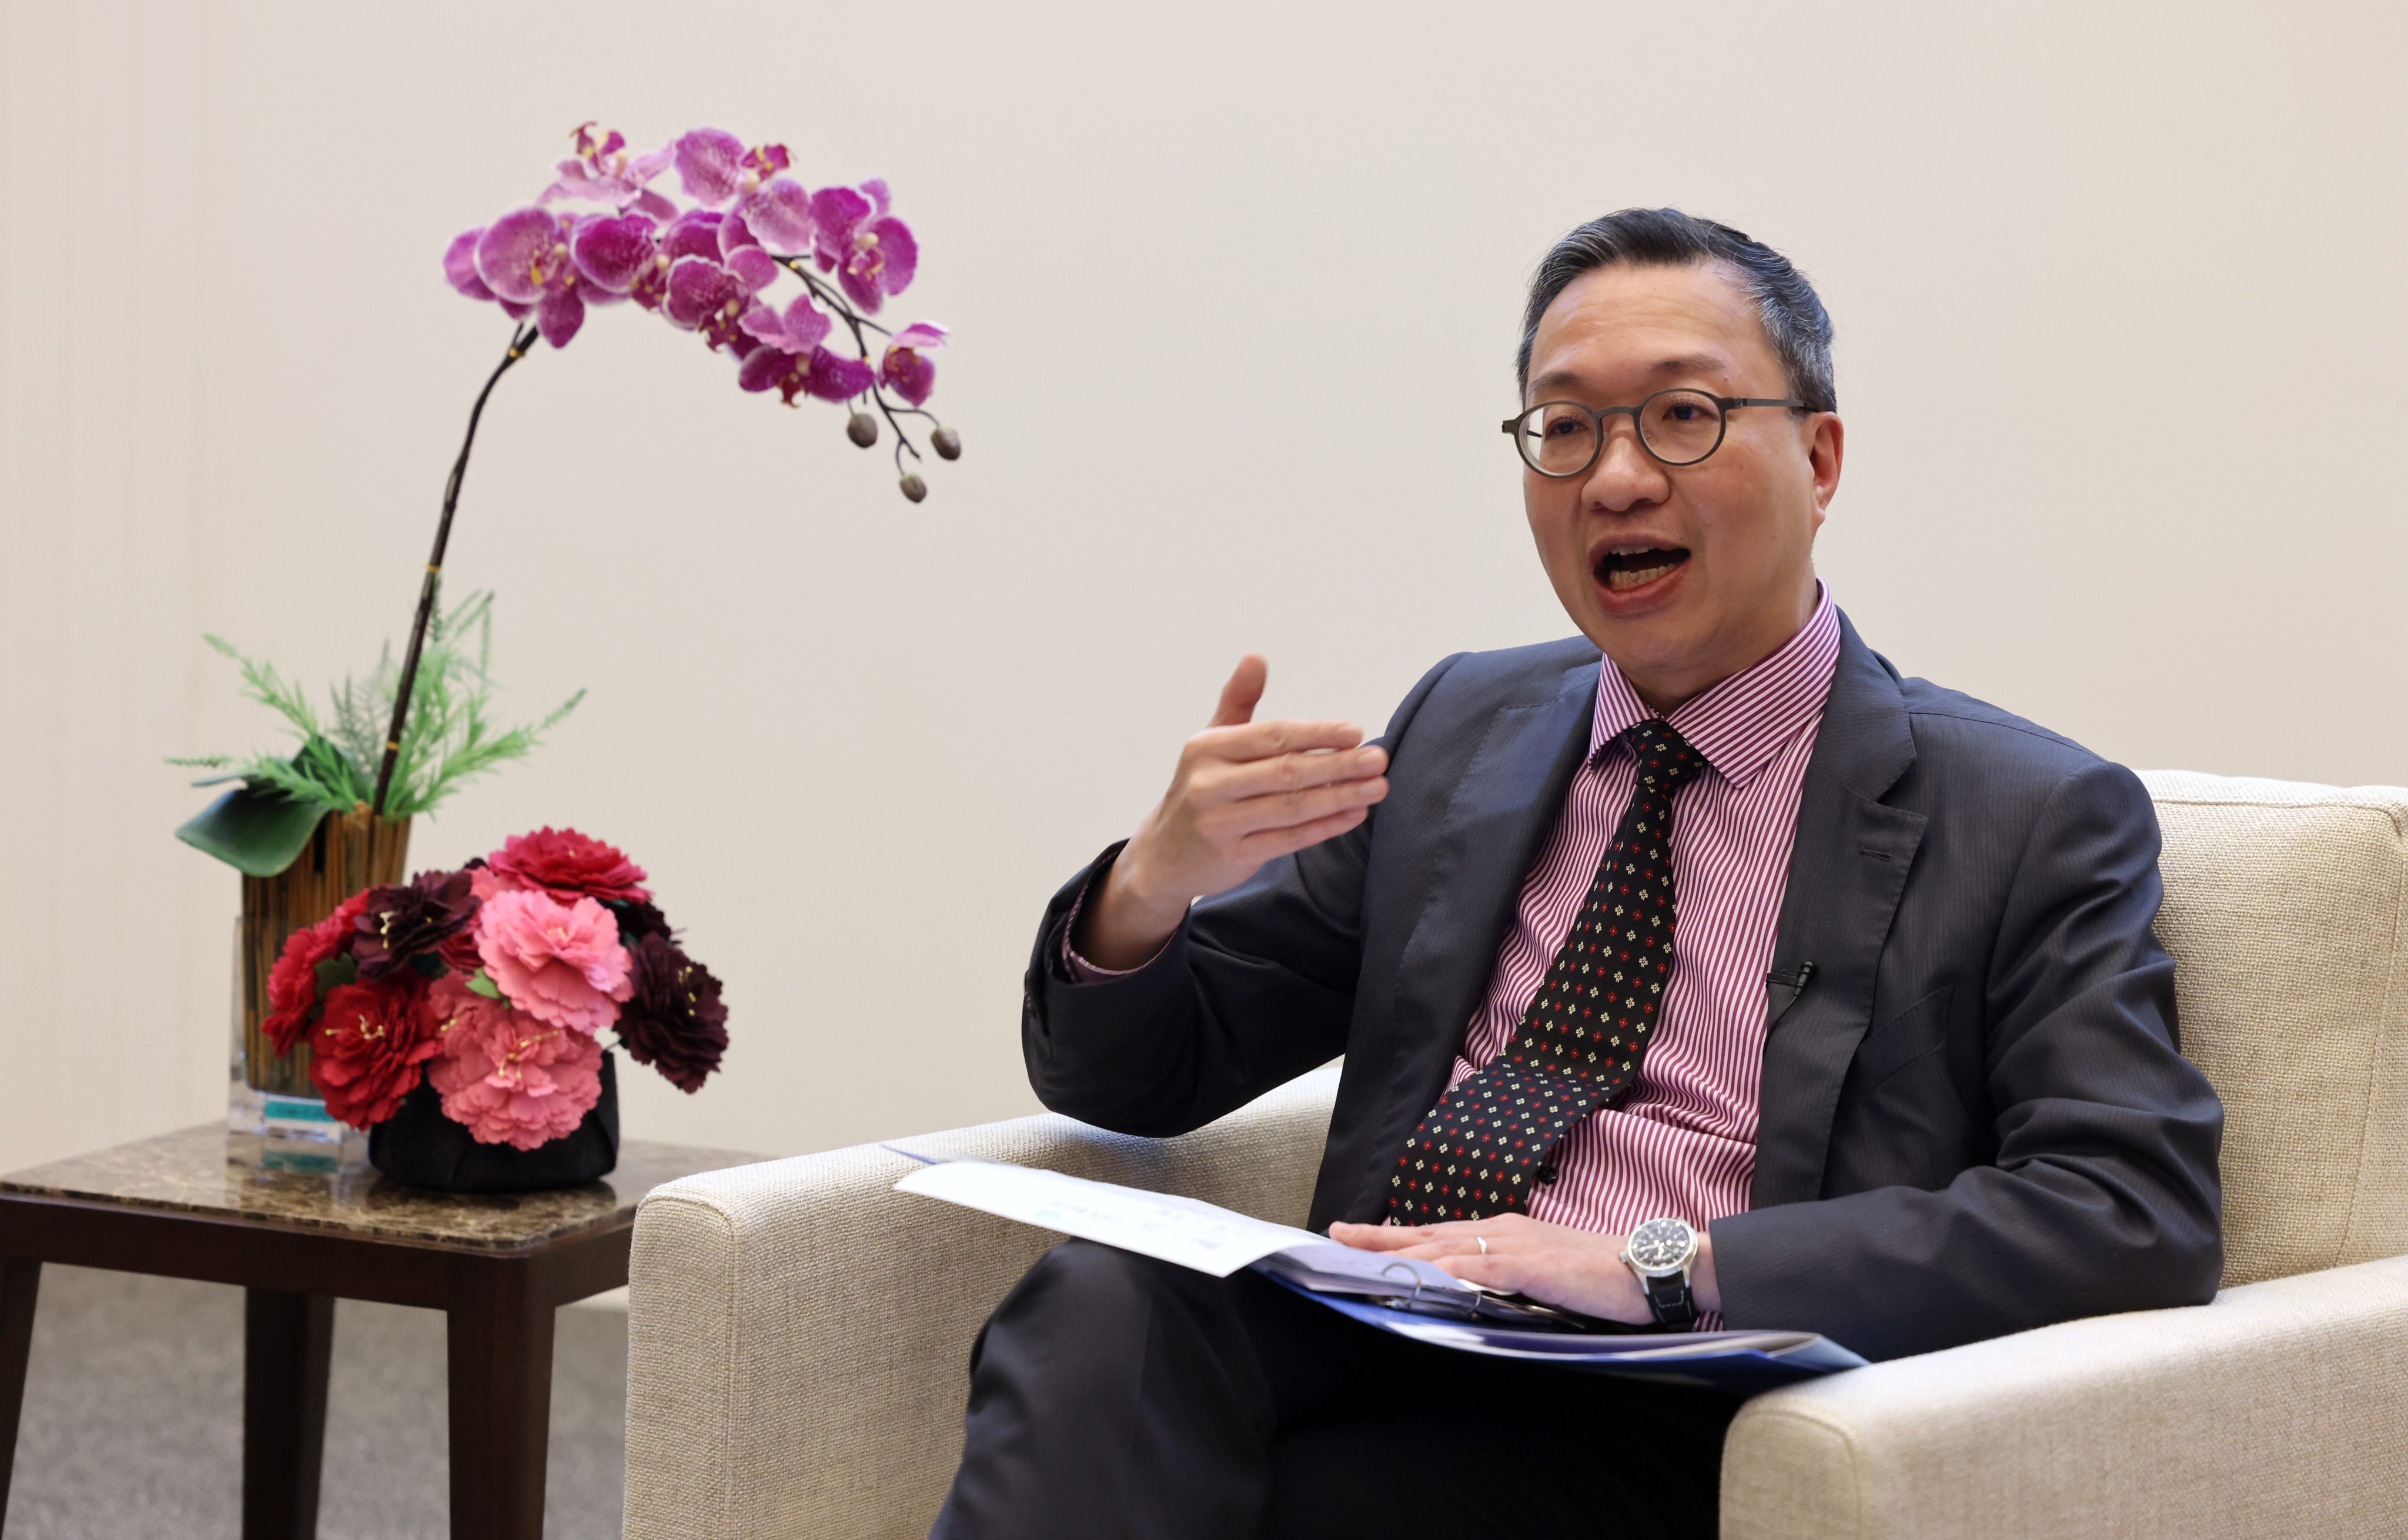 Justice chief Paul Lam says Hong Kong must confront an “unfortunate” reality when it comes to the overall perception of the city abroad. Photo: Dickson Lee